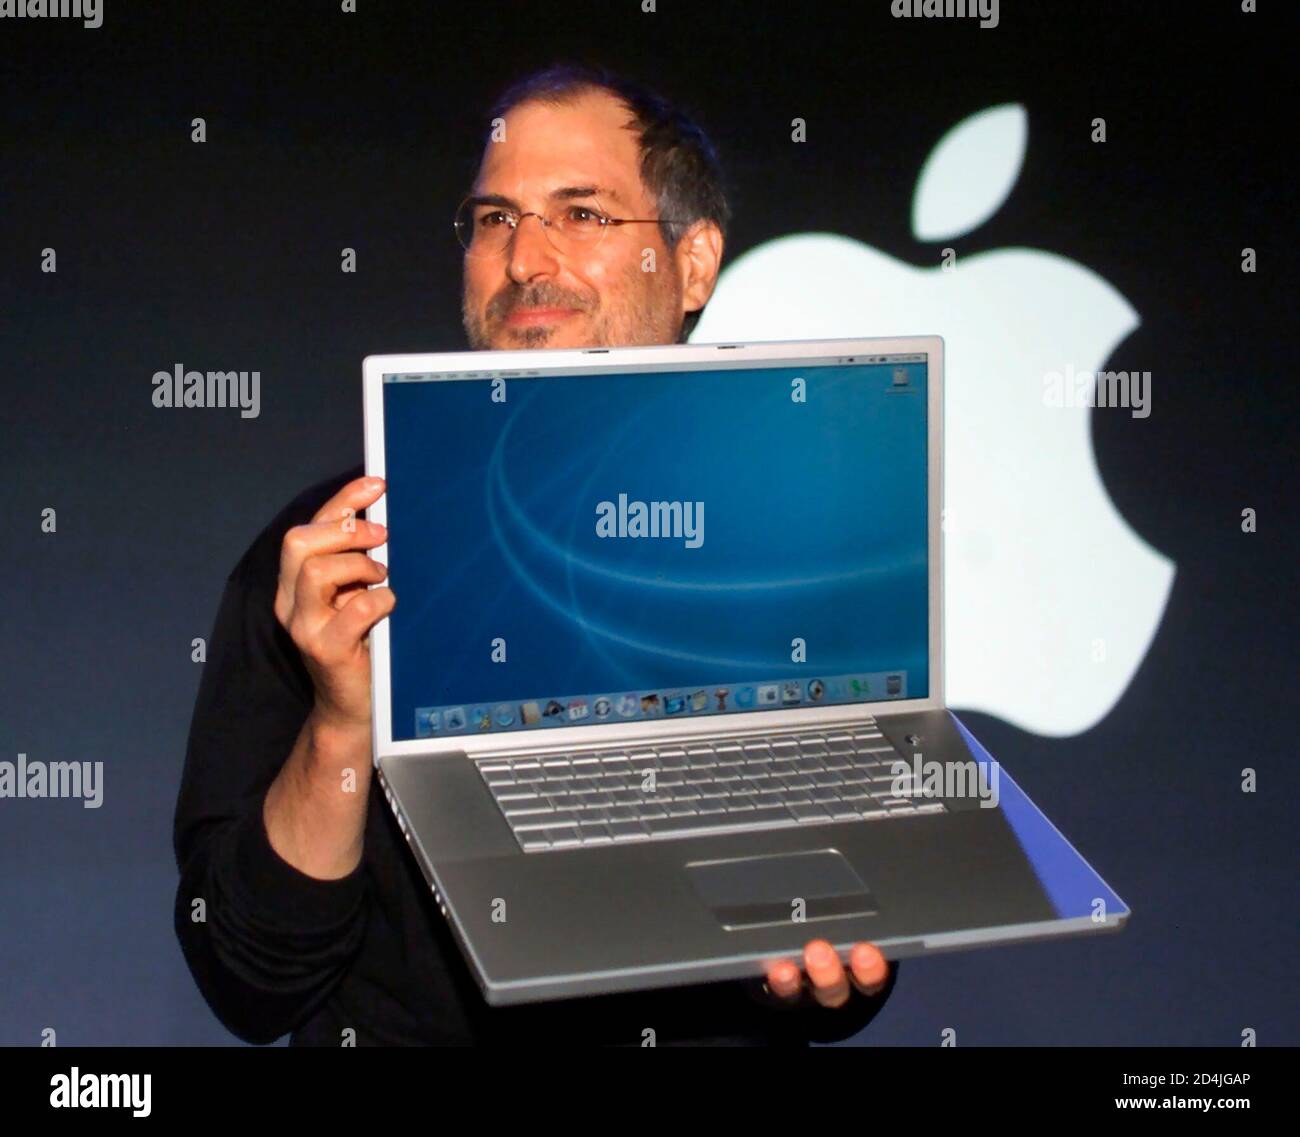 Apple Powerbook G4 High Resolution Stock Photography And Images Alamy